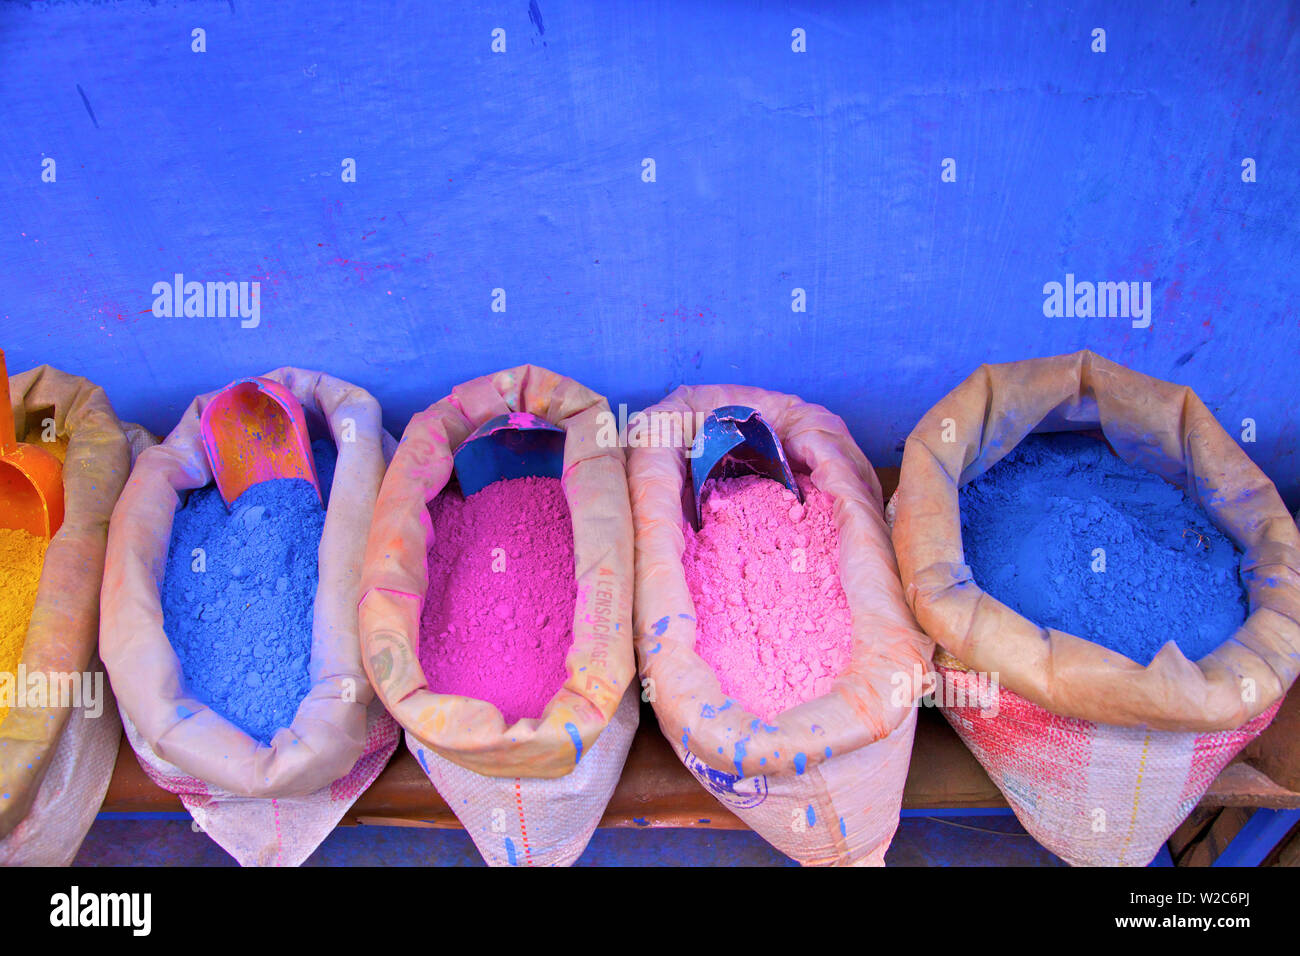 Bags Of Powdered Pigment To Make Paint, Chefchaouen, Morocco, North Africa Stock Photo